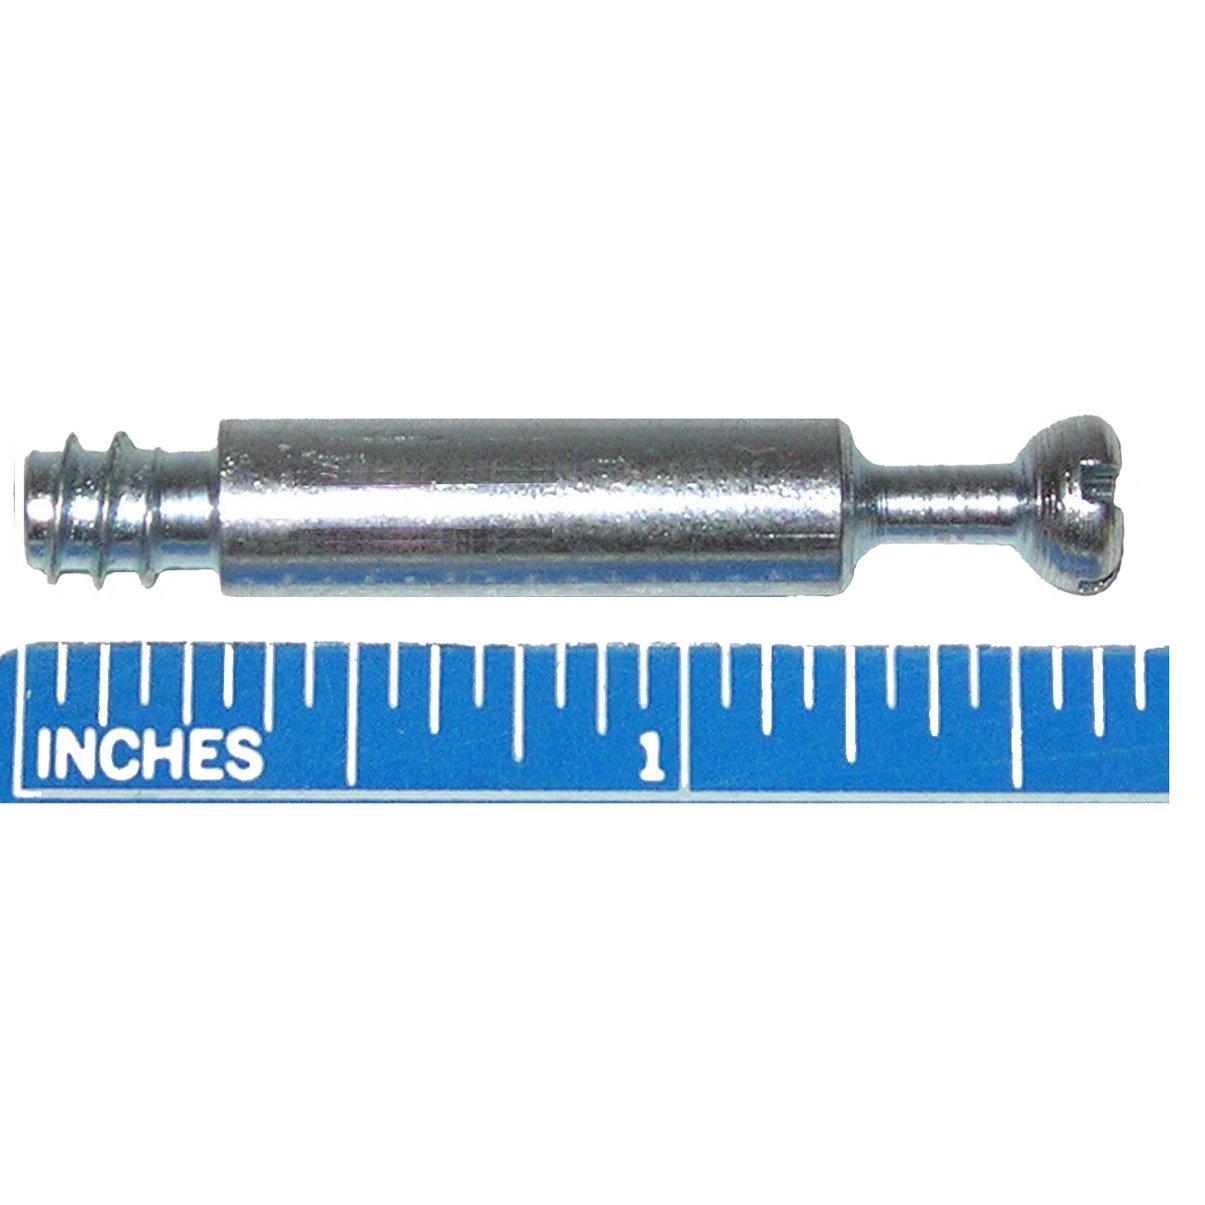 34.5mm 42mm Overall Dowel Pin For Cam Lock Disc Furniture Connectors Fit 5mm 